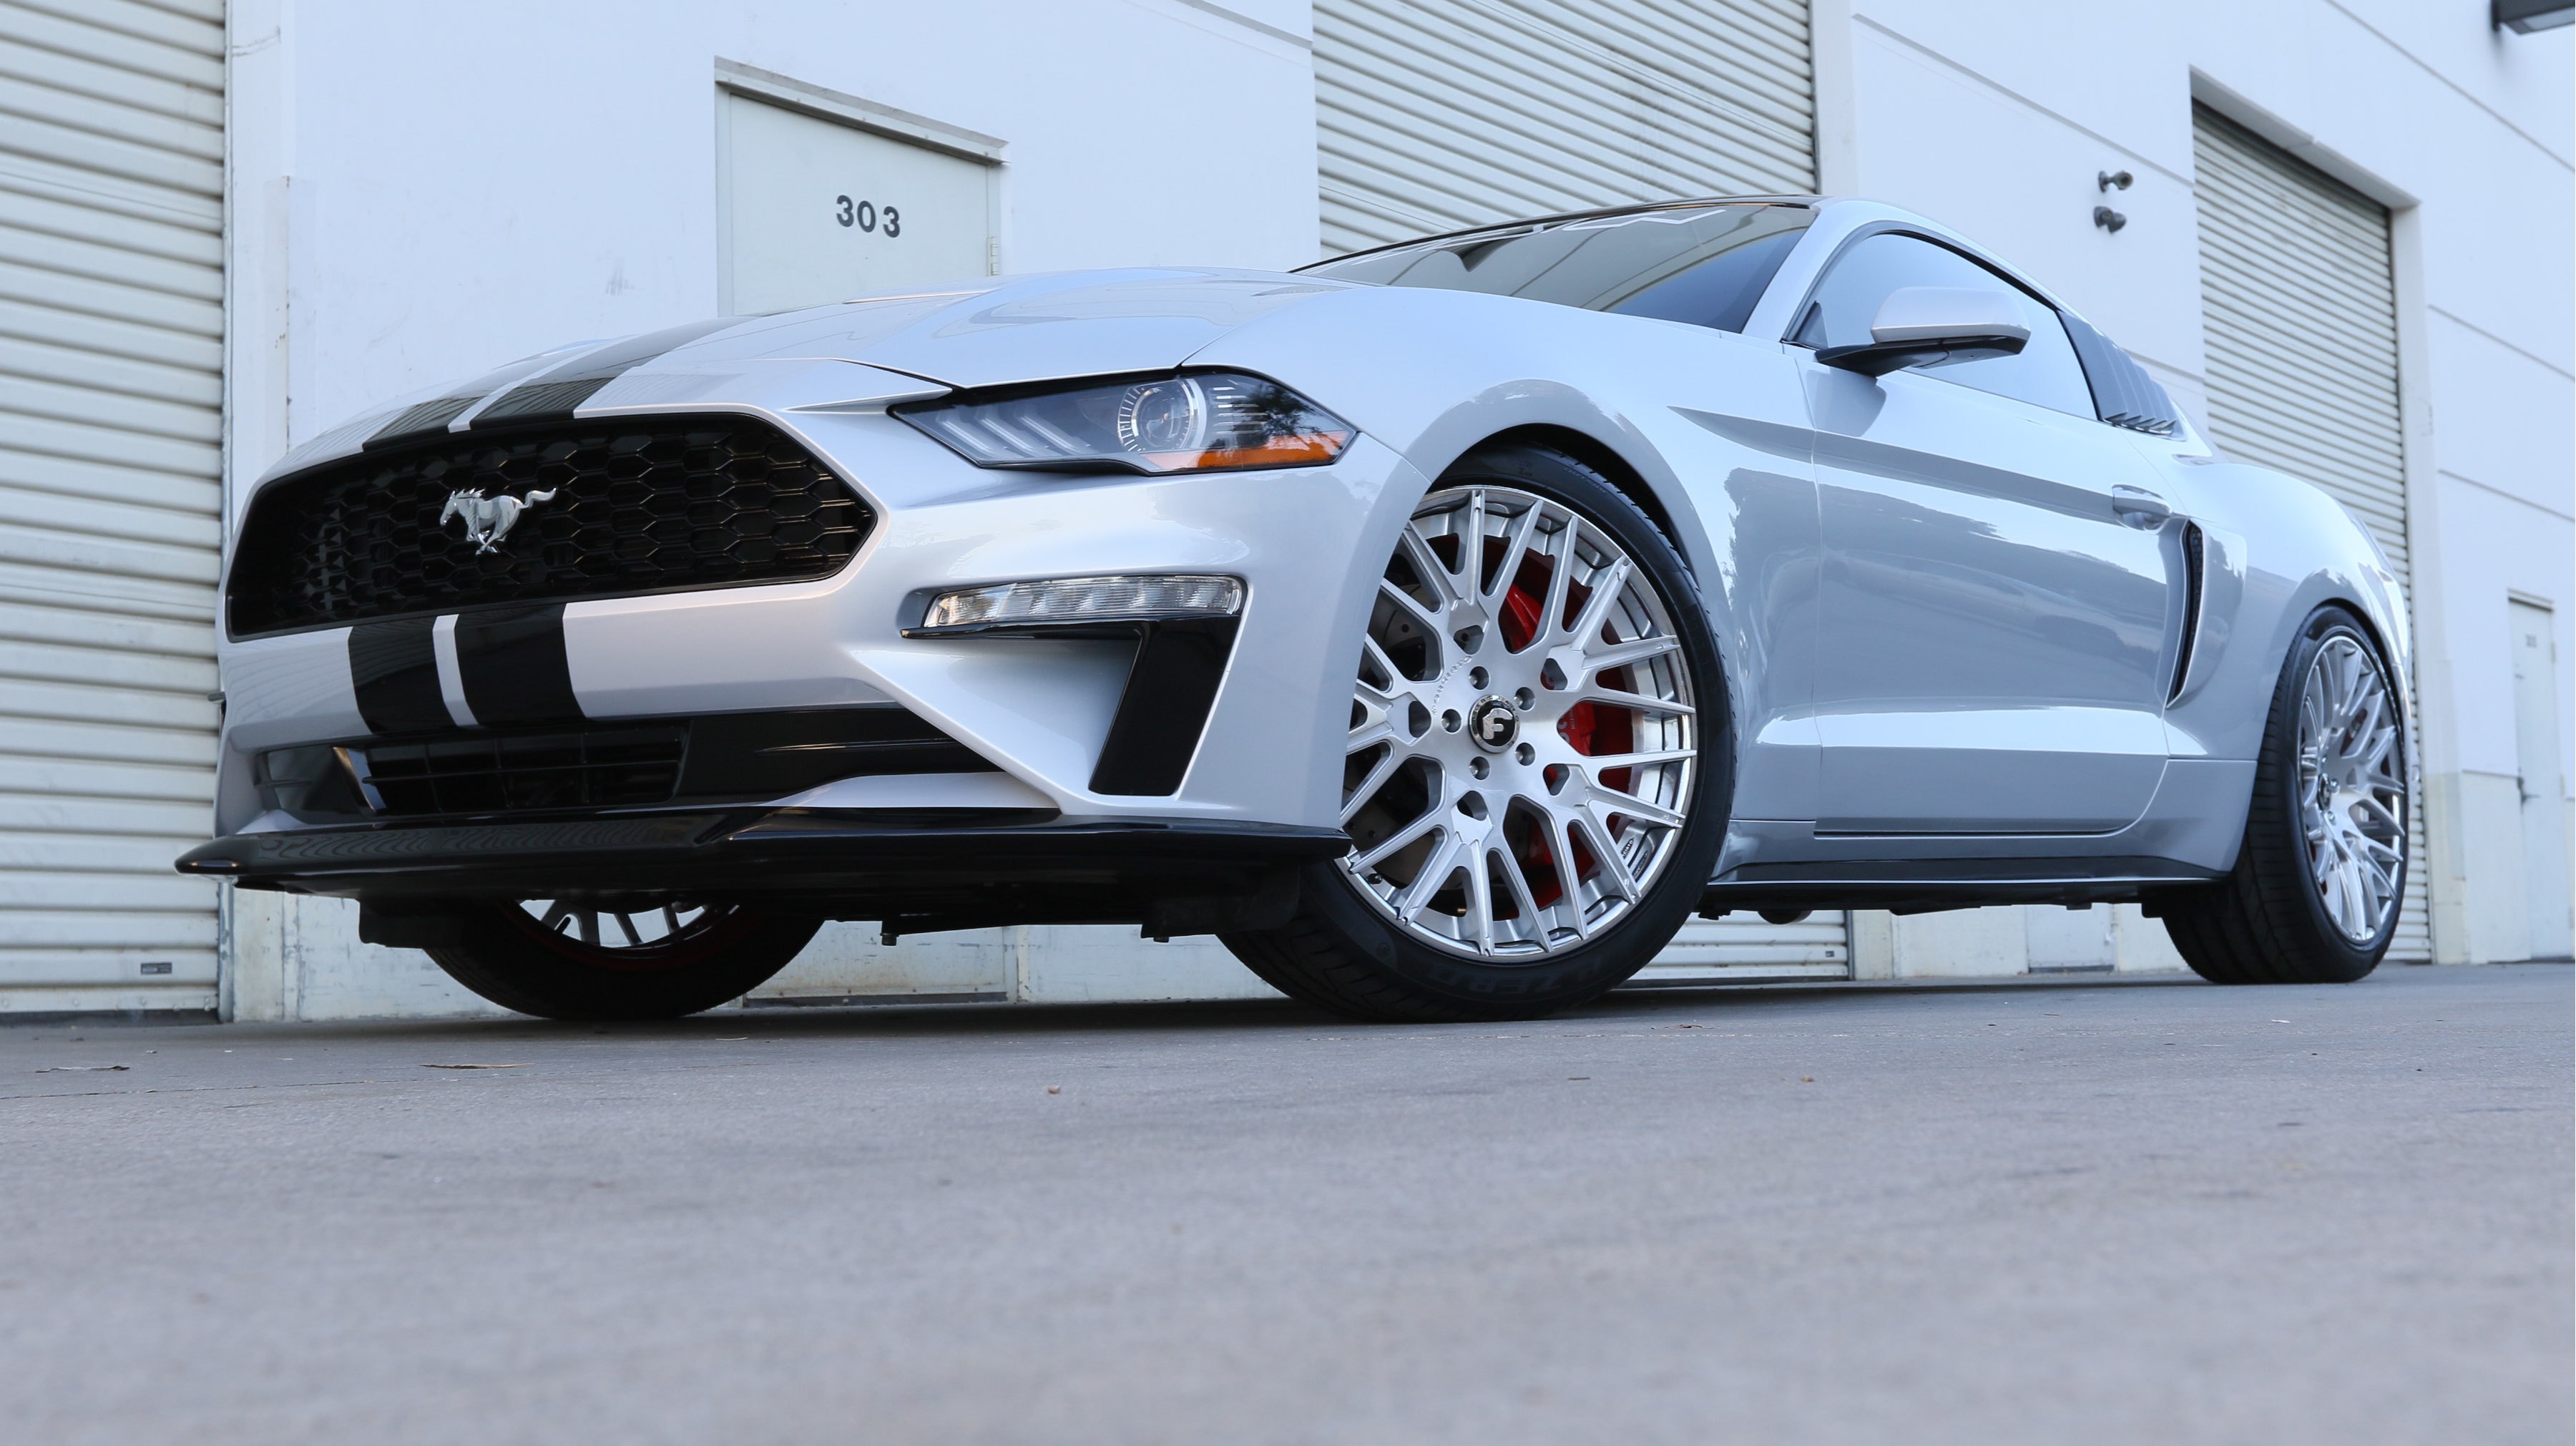 Custom Projector Headlights on Gray Ford Mustang - Photo by Air Design USA